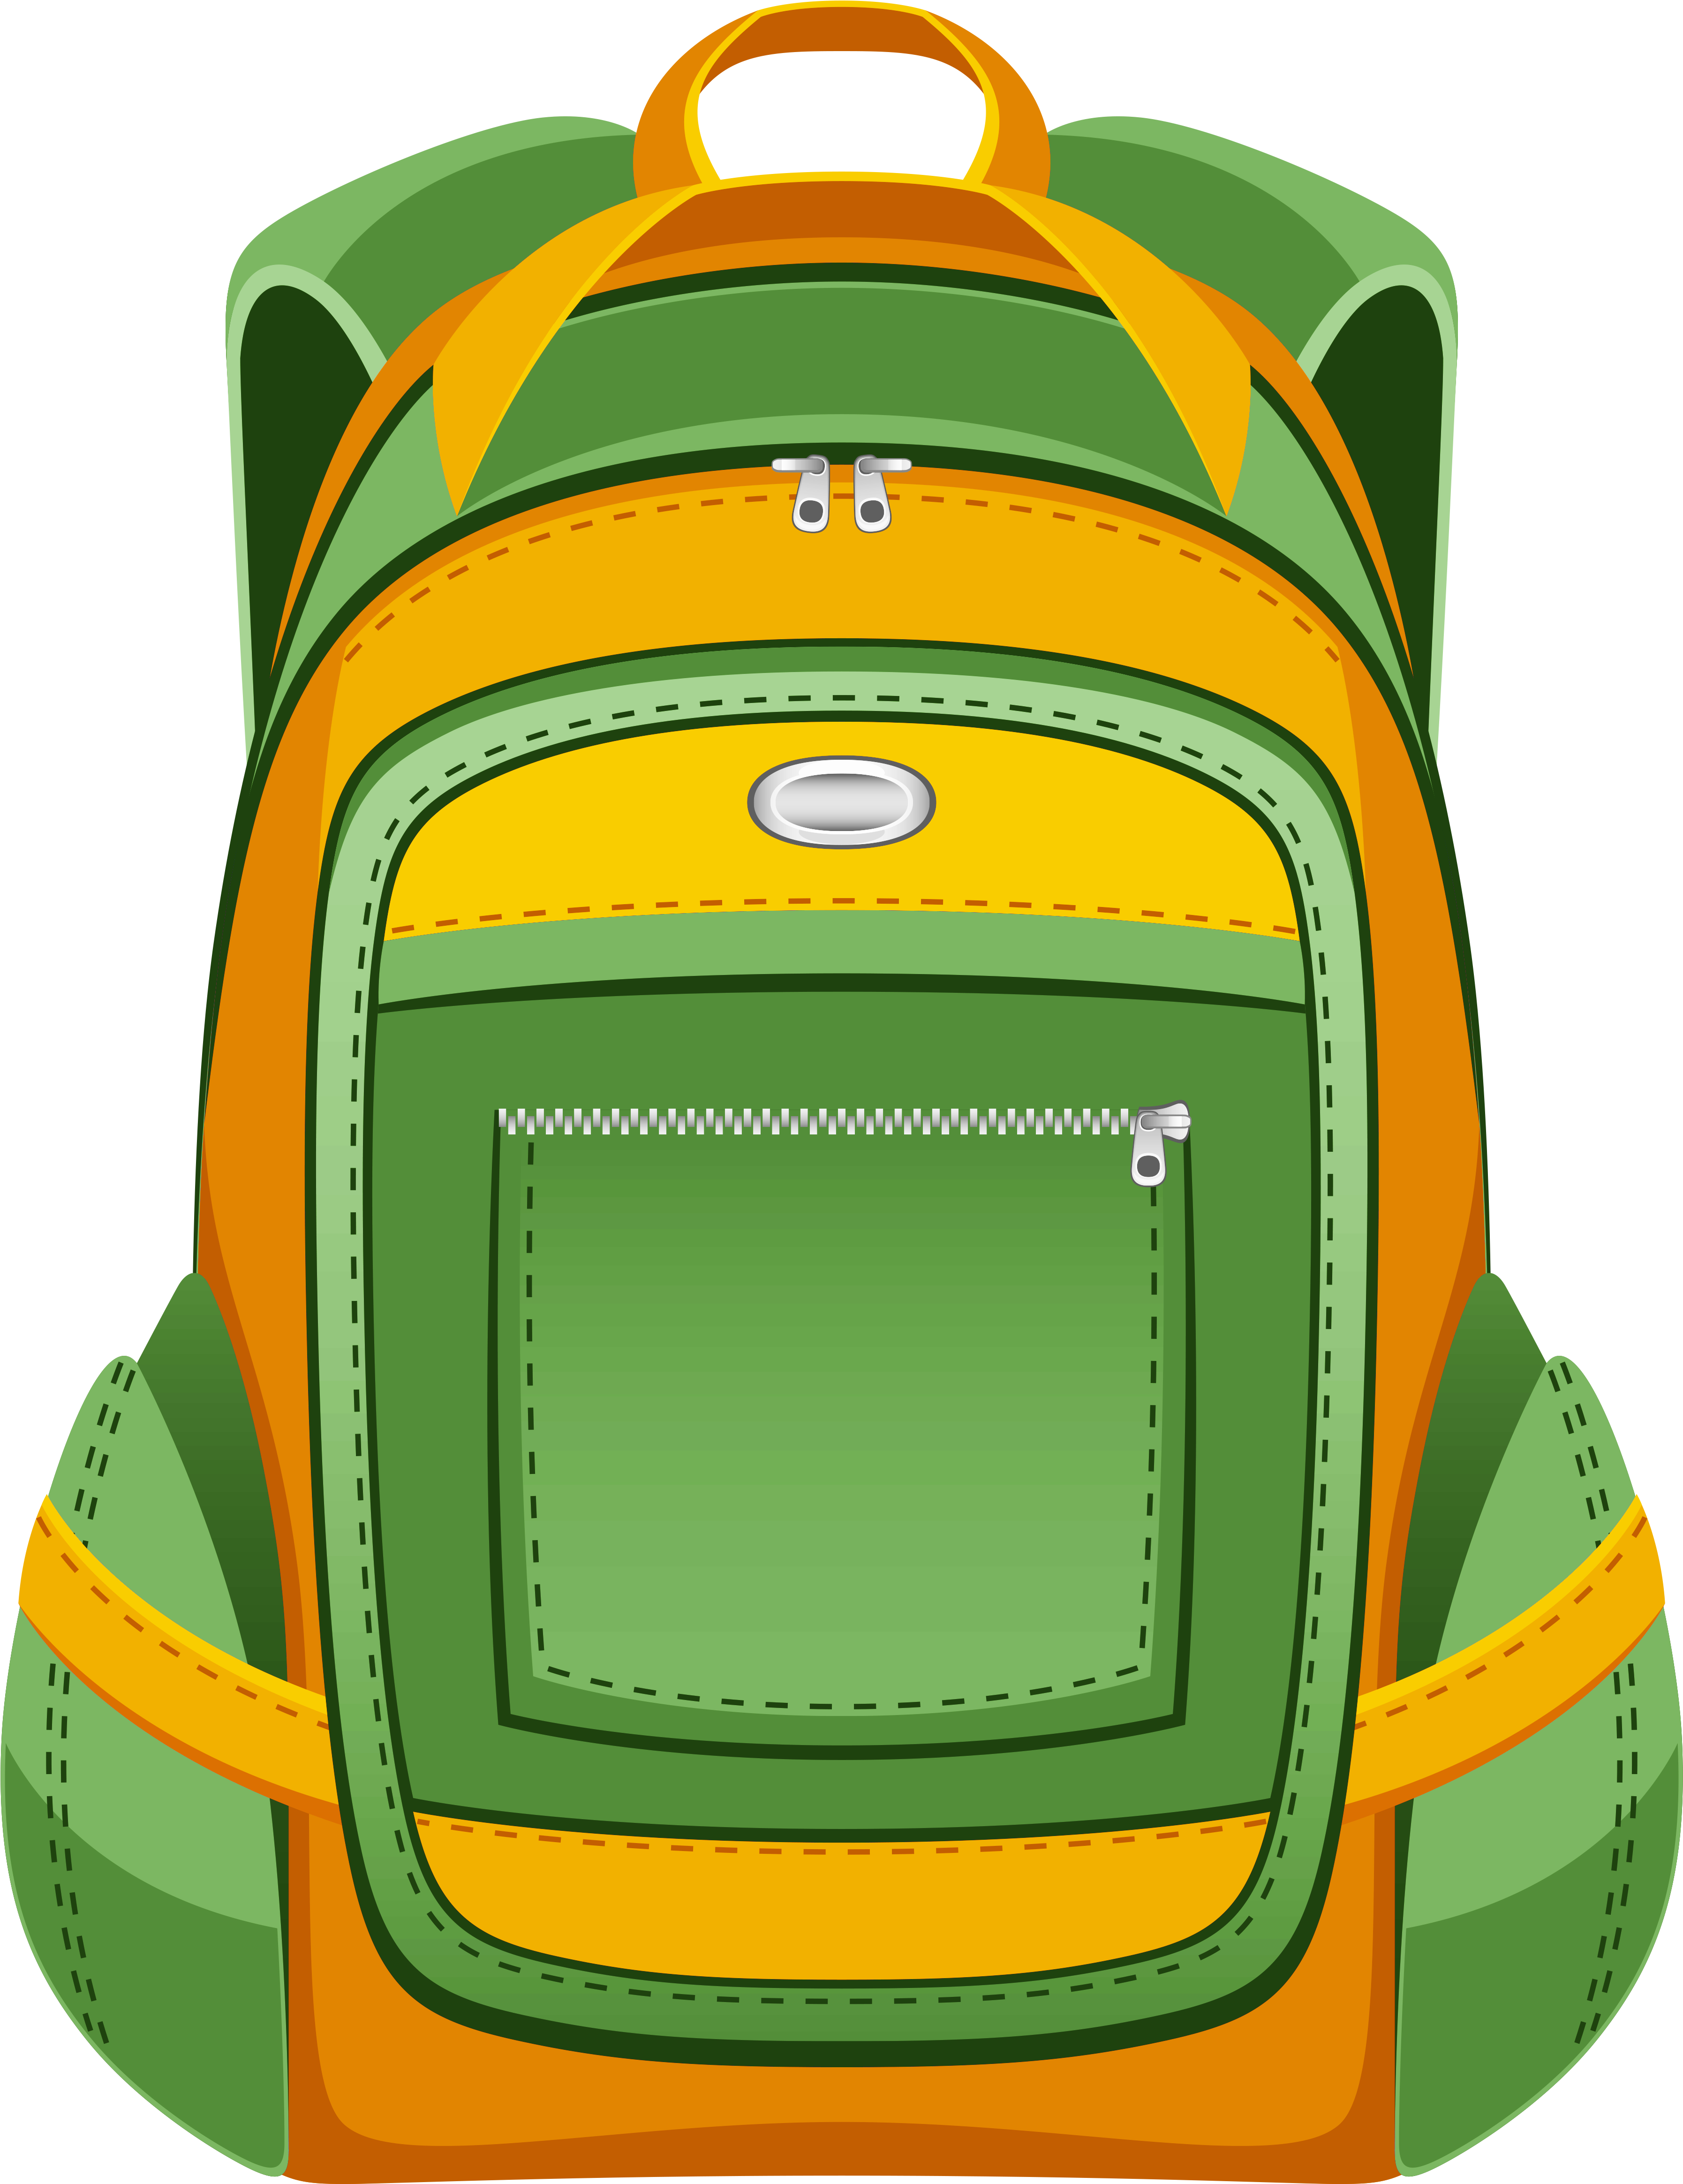 This School Backpack Clip Art Free Clipart Images 2 - Backpack Png Clip Art (3924x4992)